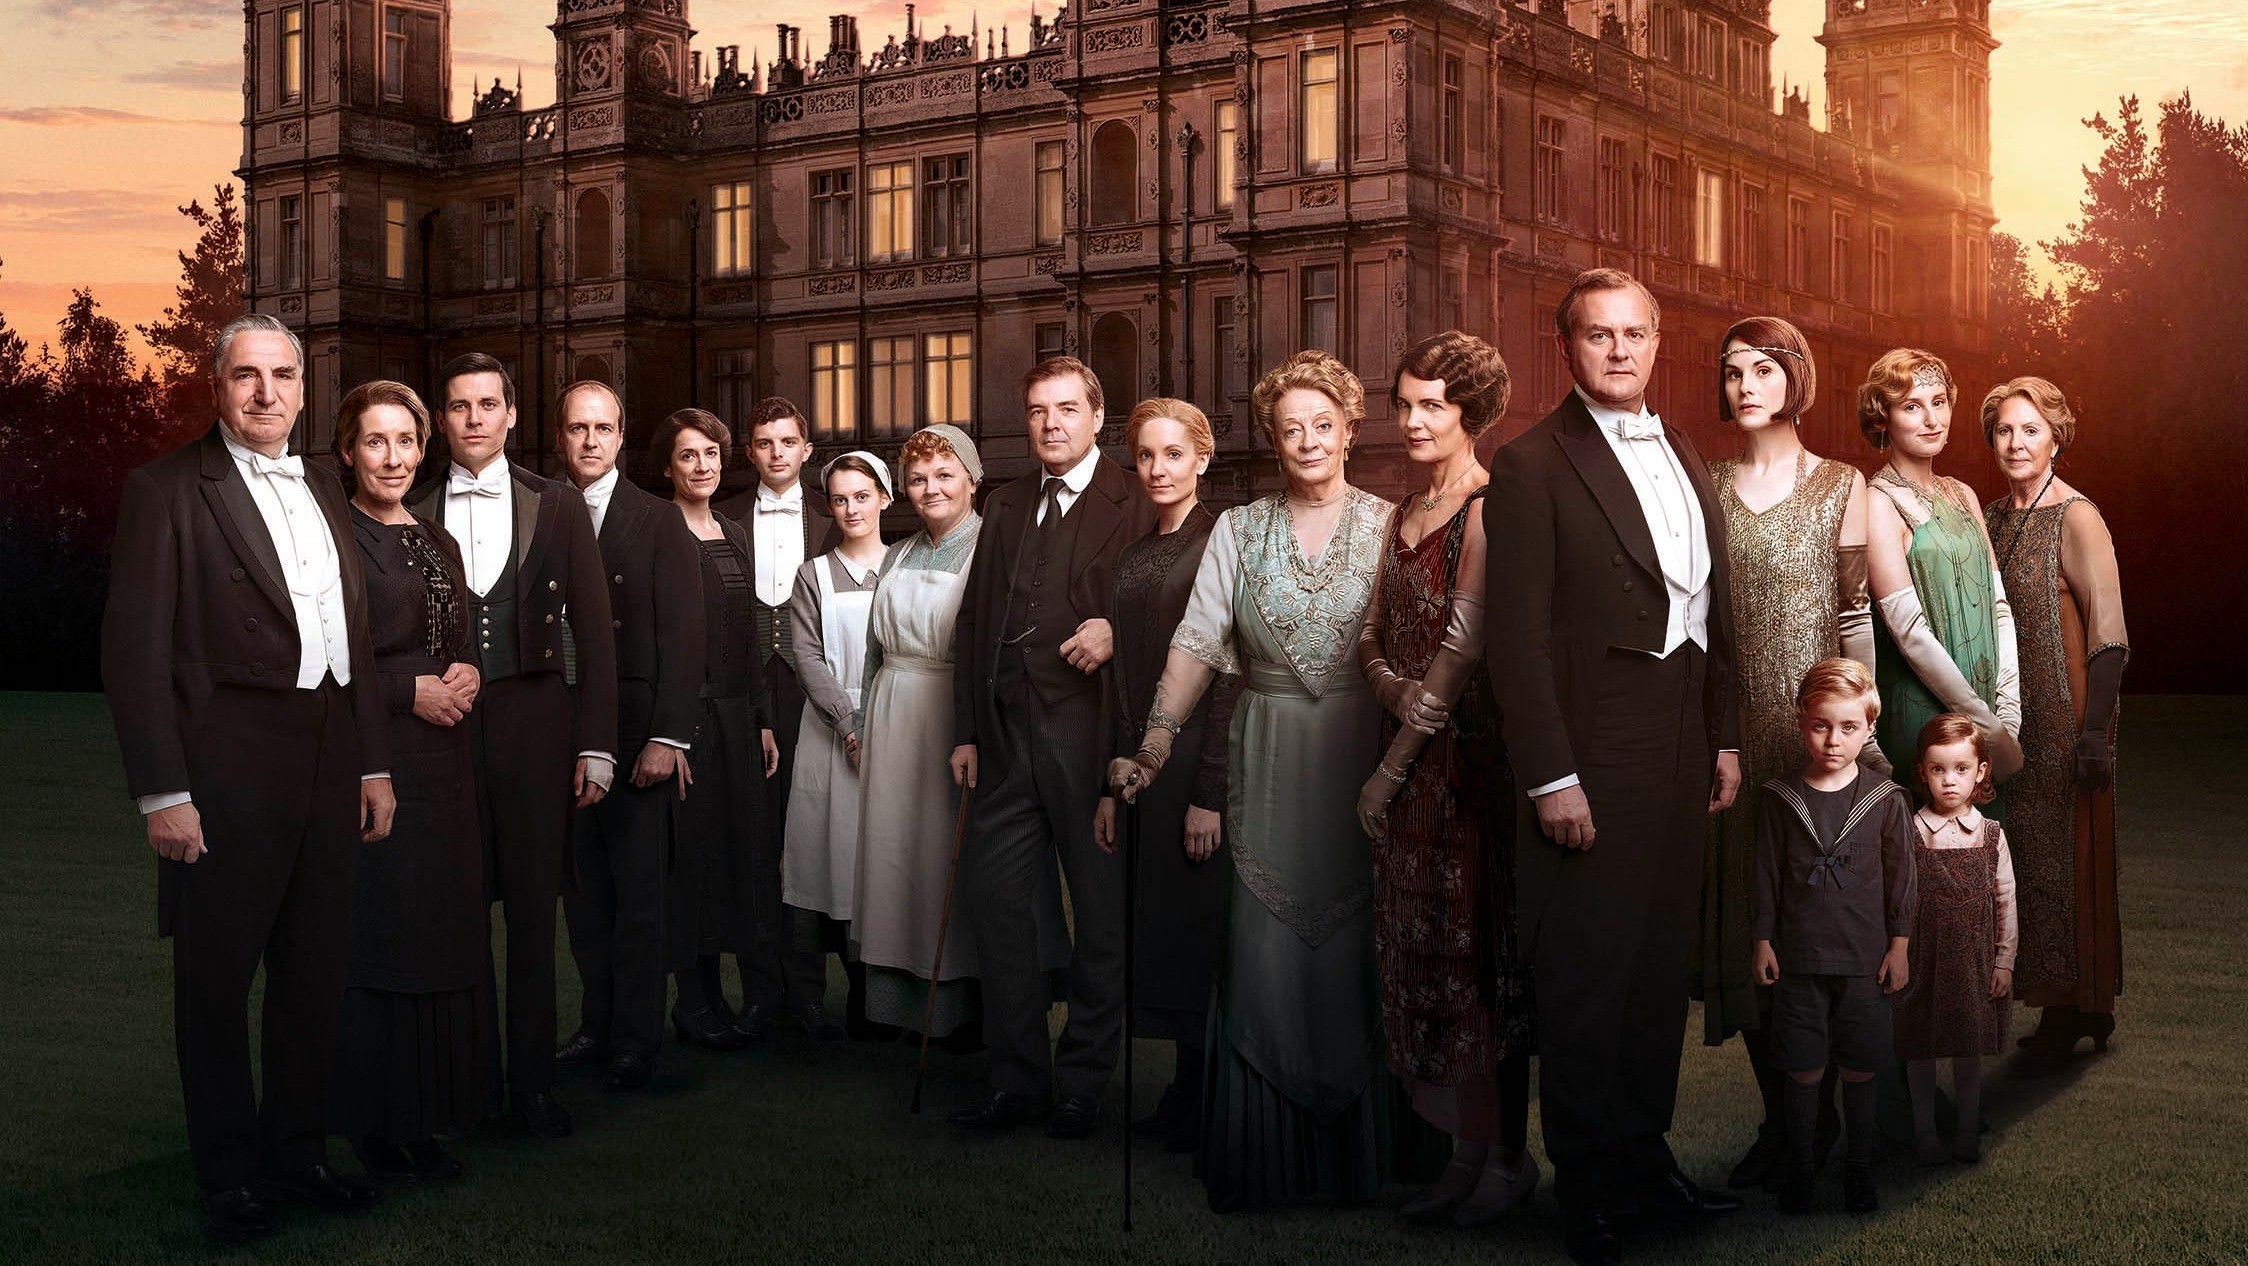 ‘Downton Abbey’ final series premieres this Sunday